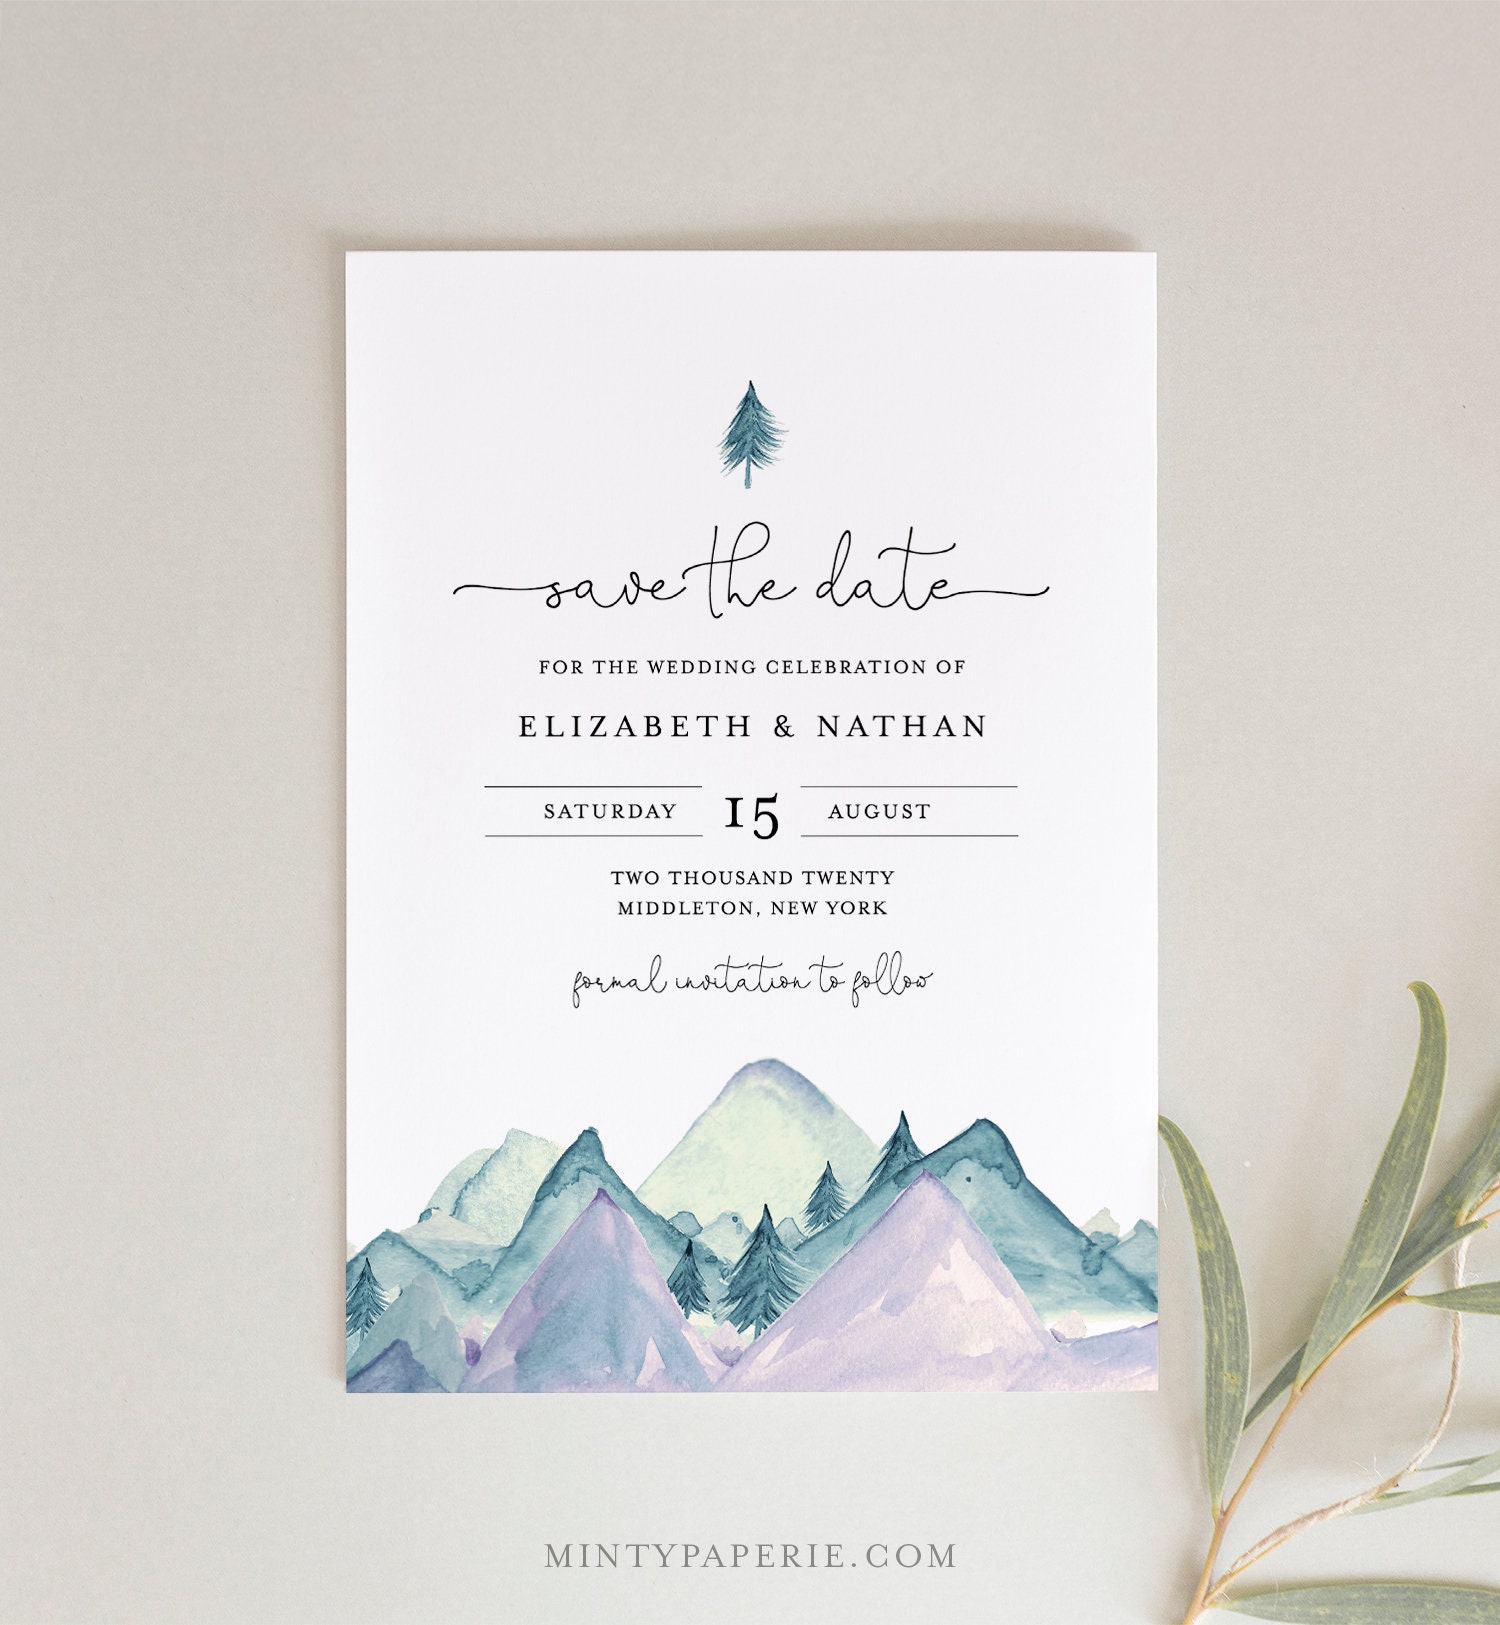 Evergreen Trees Save Date 515-A Instant Download Mountains Printable Save the Date DIY Template Rustic Woodland Editable Save the Date